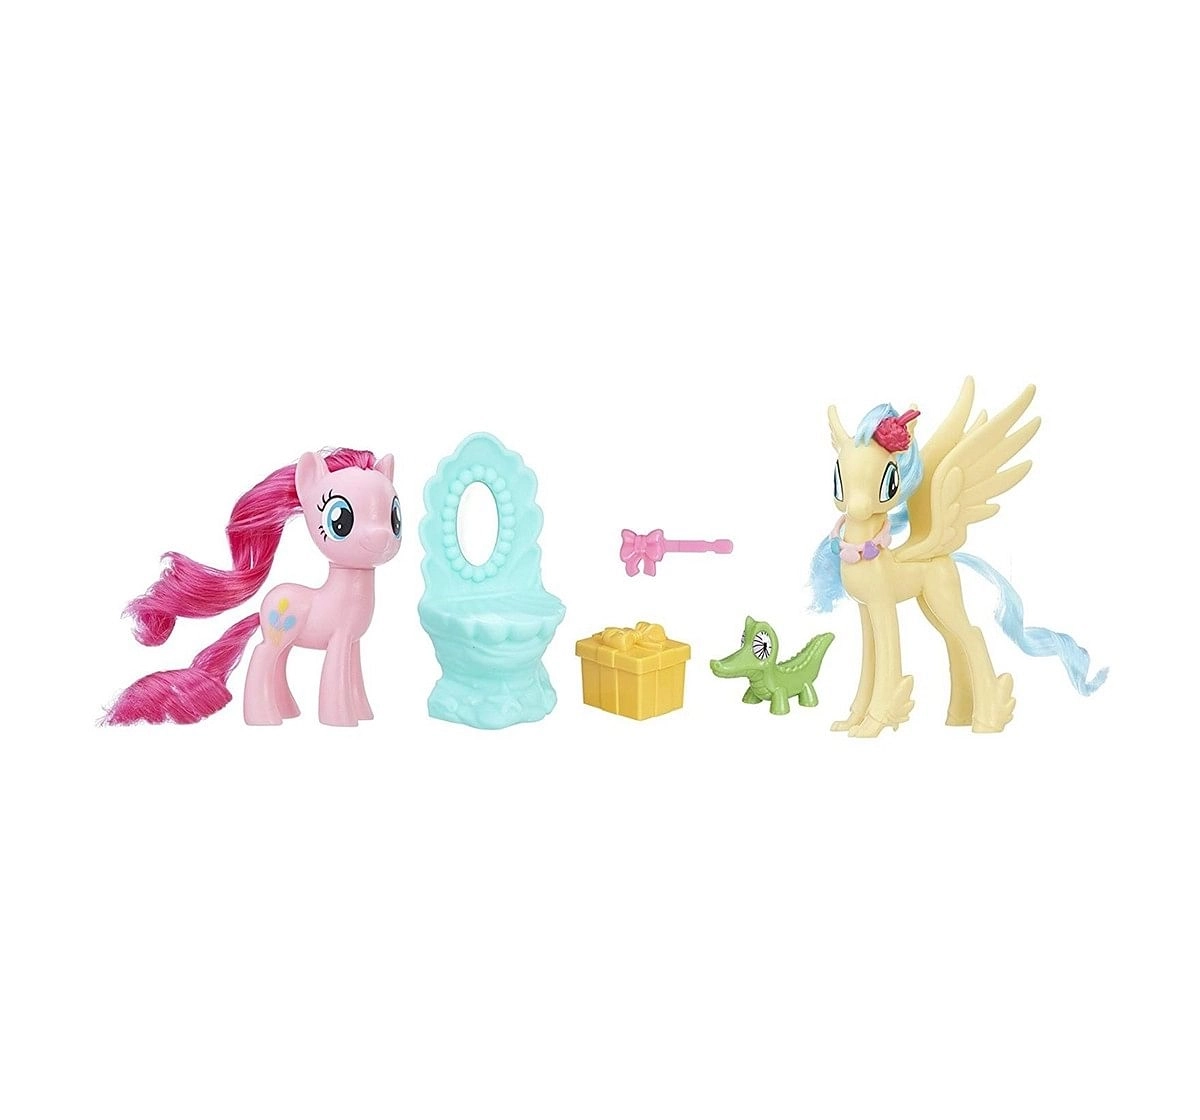  My Little Pony Pinkie Pie N Princess Skystar Collectible Dolls for age 3Y+ 